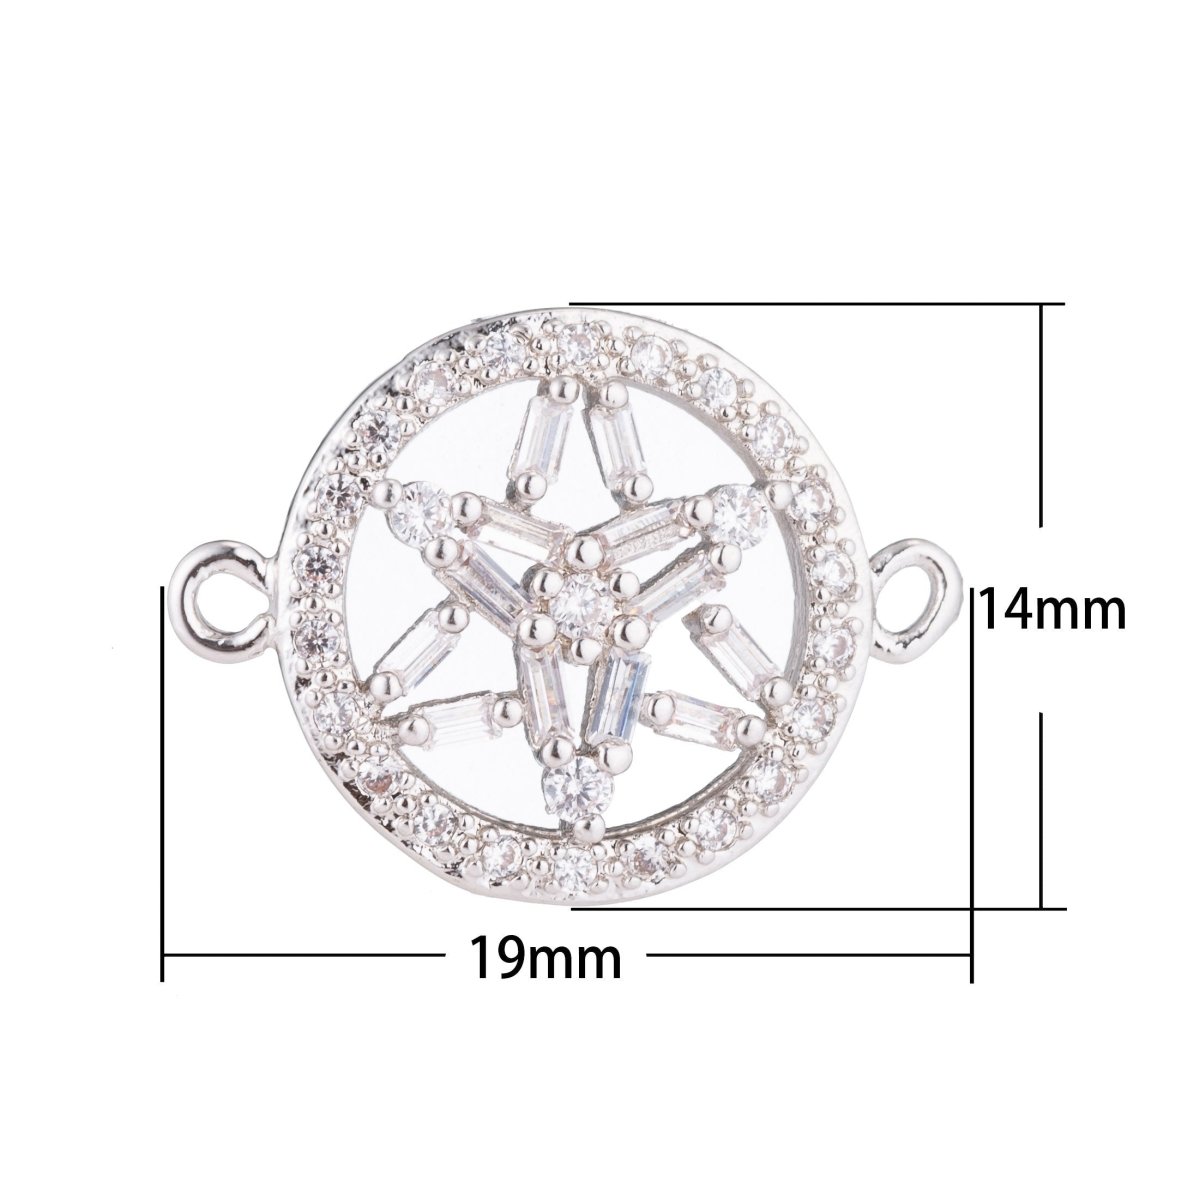 DEL-White Gold Filled Shining Star, Circle of Love, Cubic Zirconia Bracelet Connector Charm, Necklace Pendant, Findings for Jewelry Making, F-156 - DLUXCA